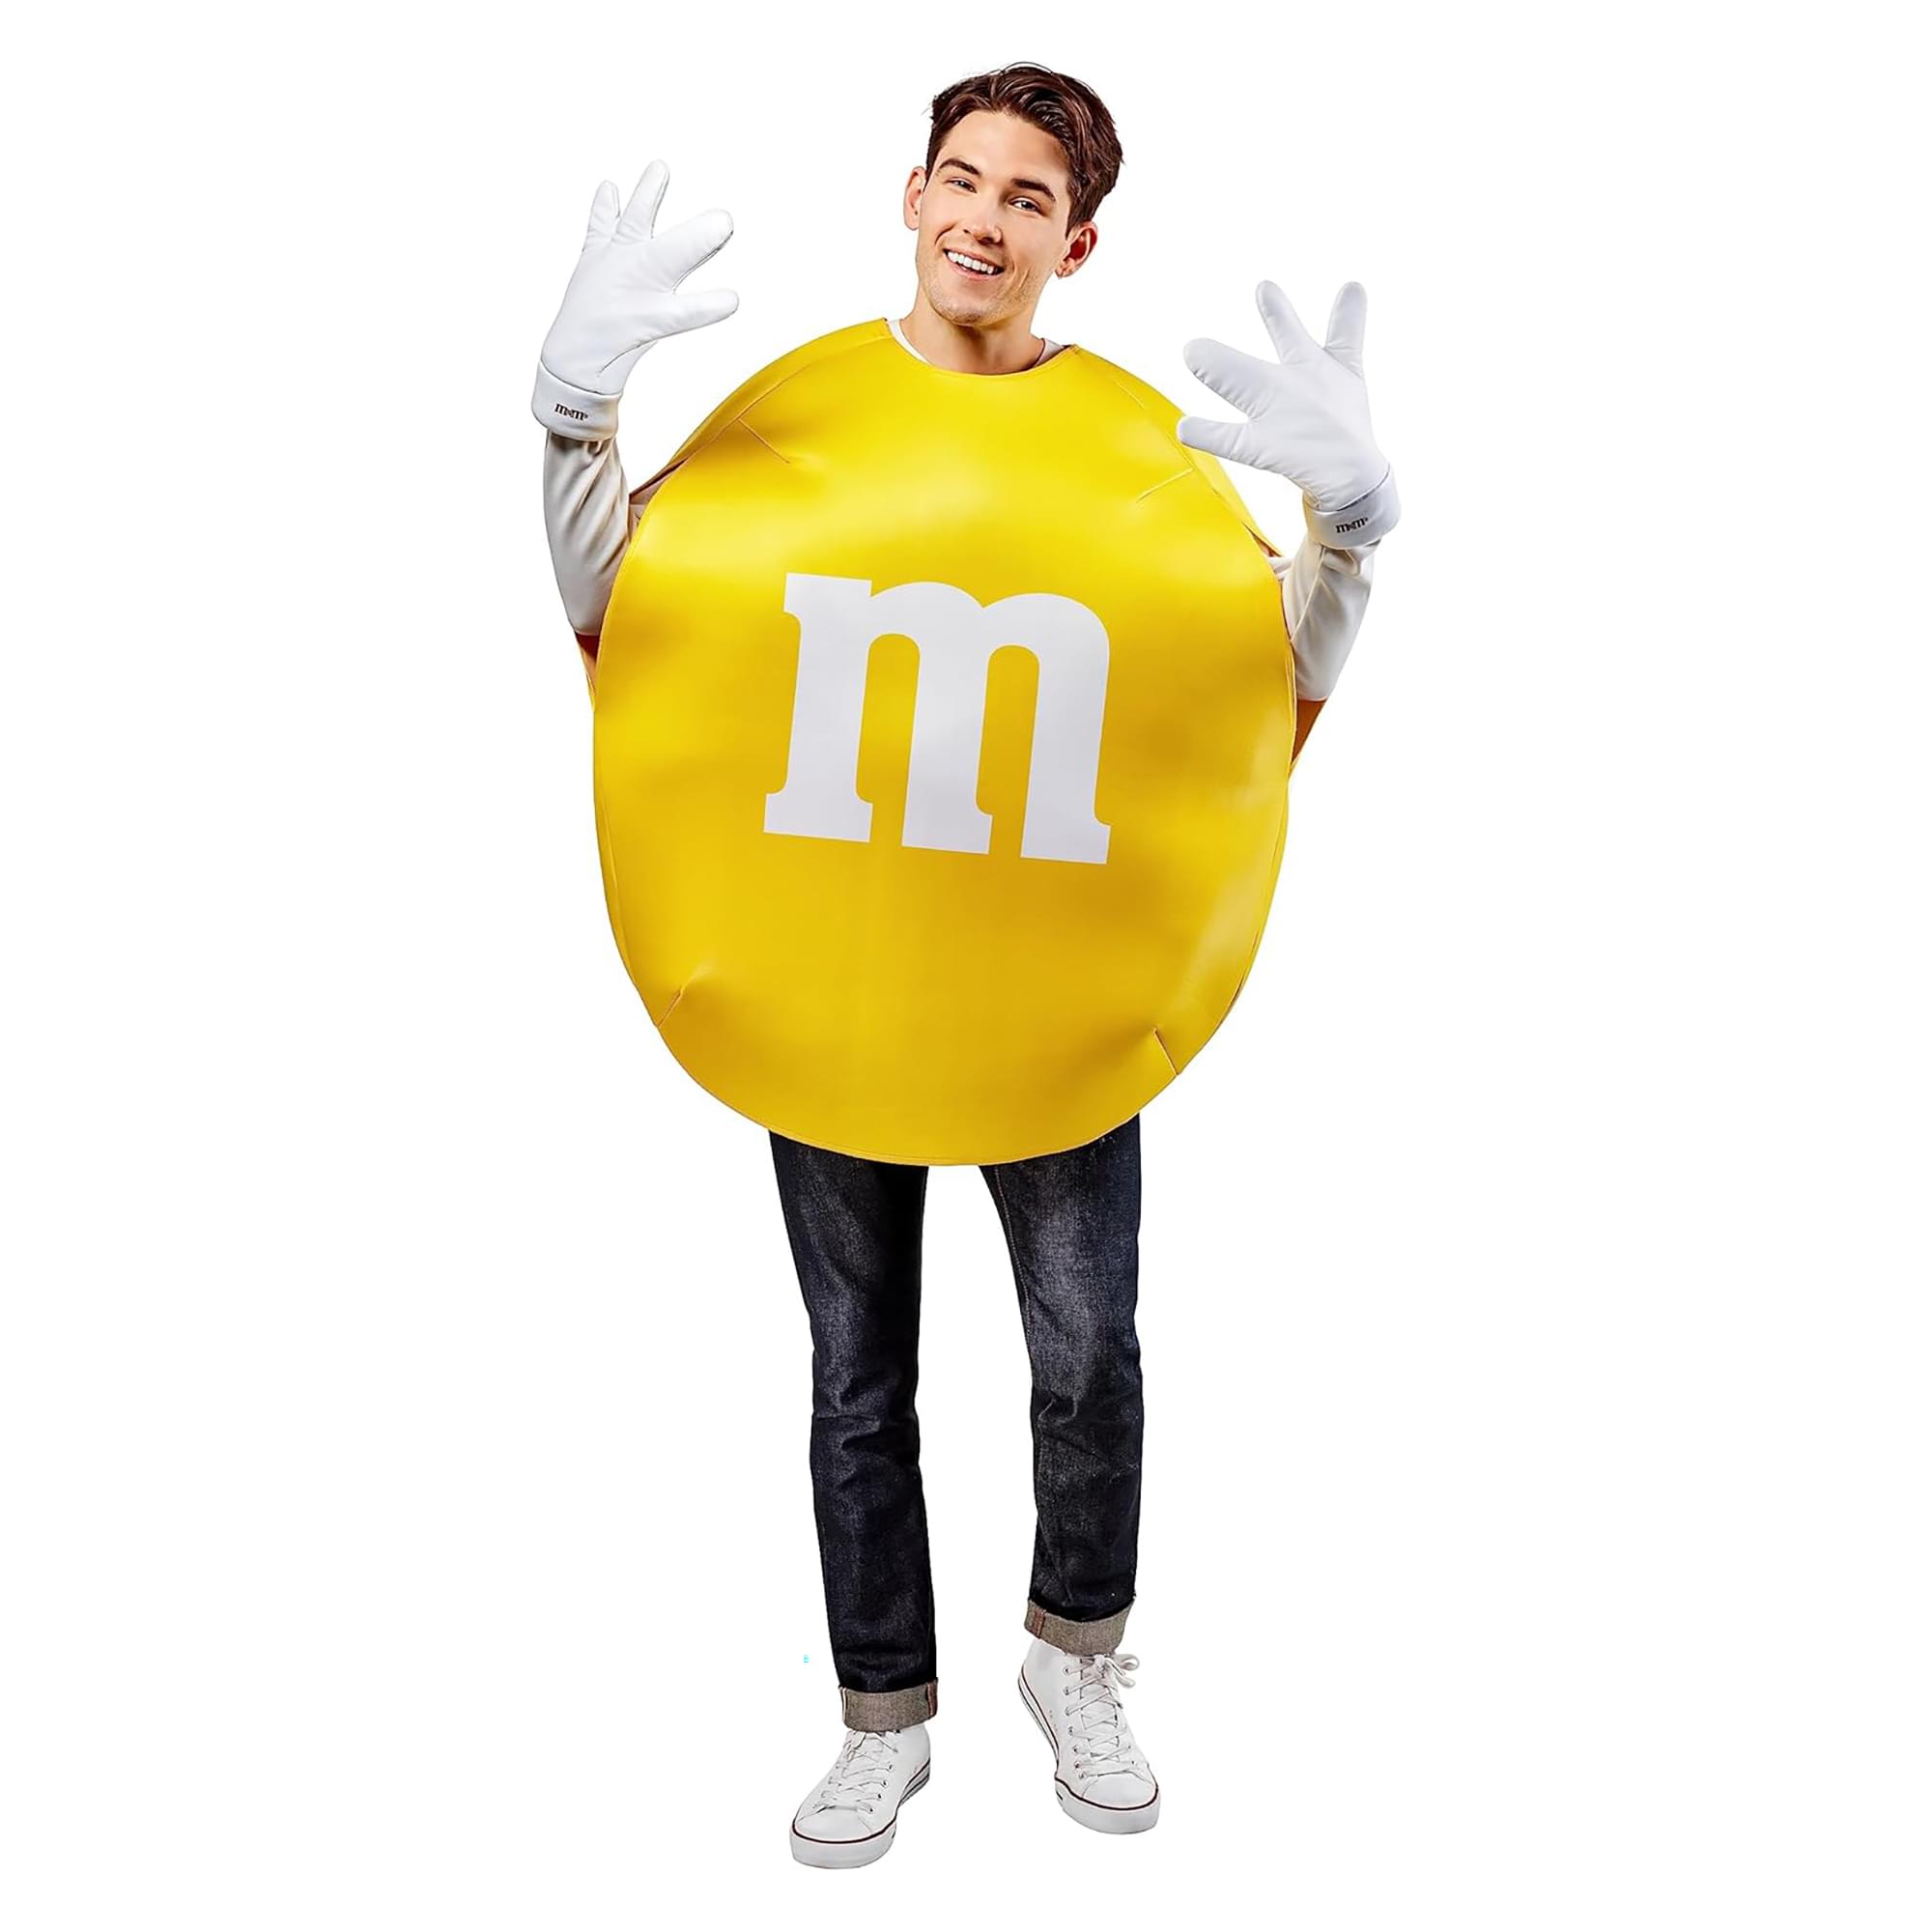 Adult Green M&M'S Costume Kit with Suspenders 